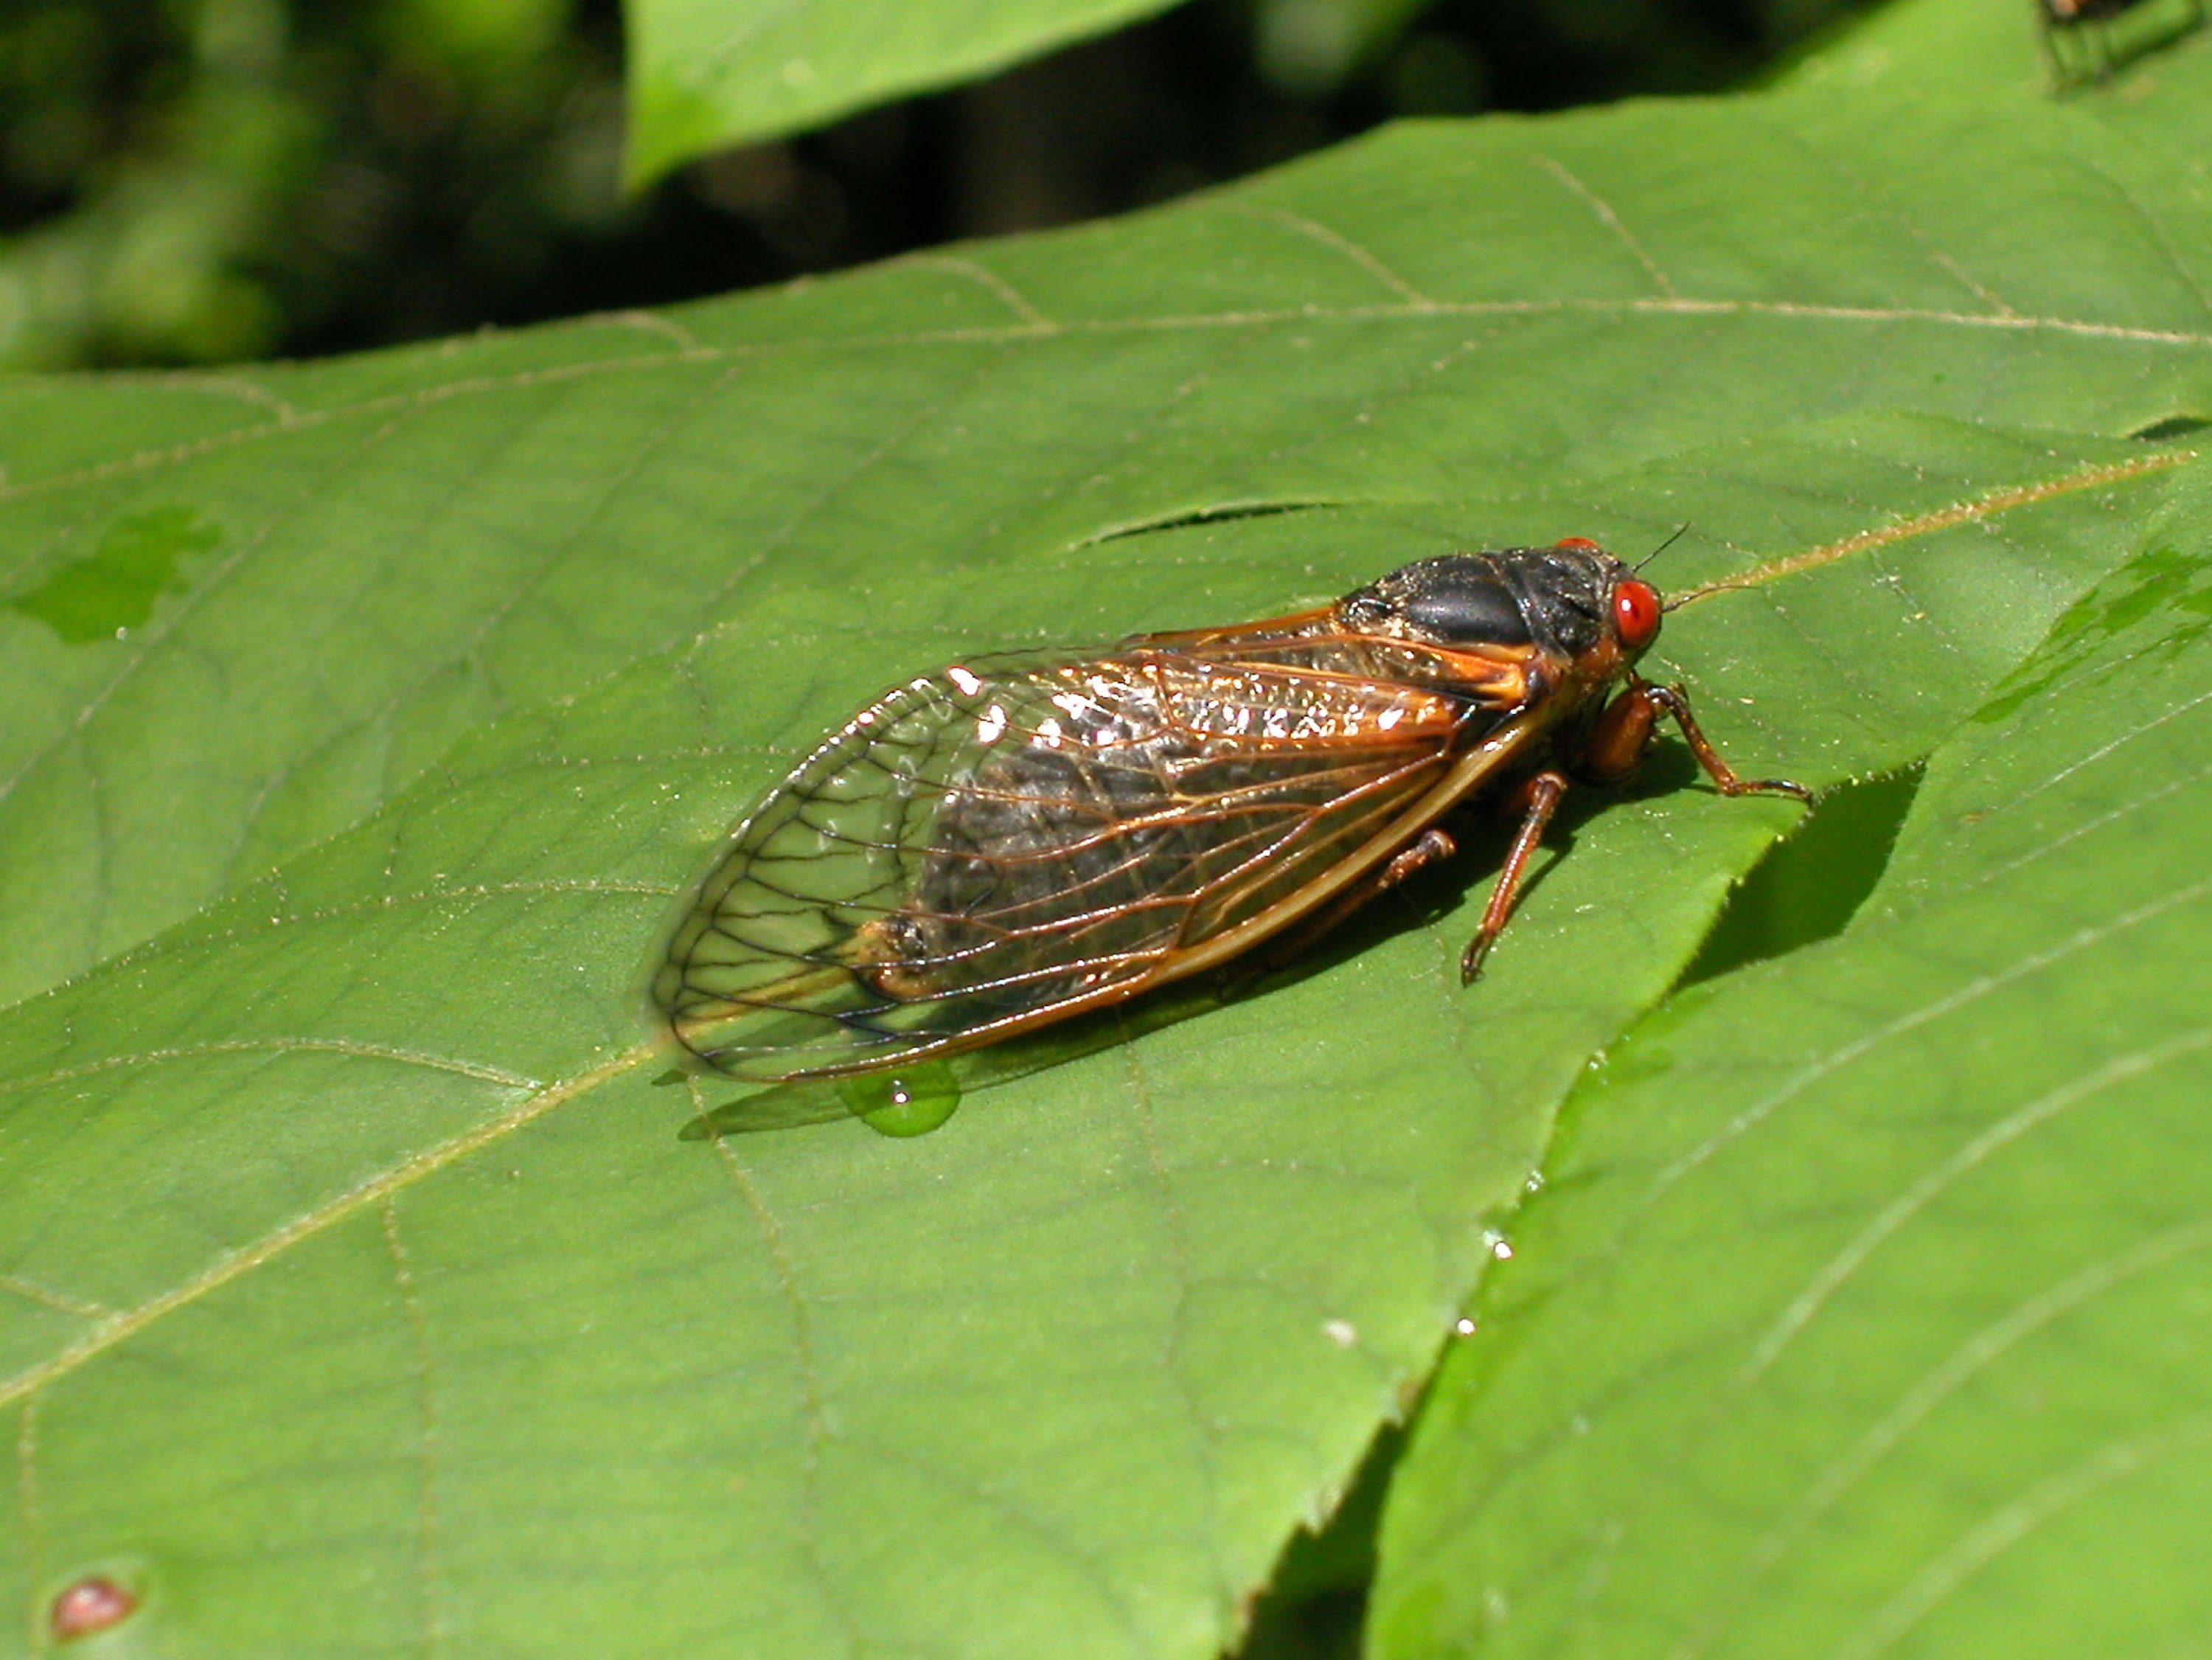 Cicadas living underground for past 17 years to emerge in these states